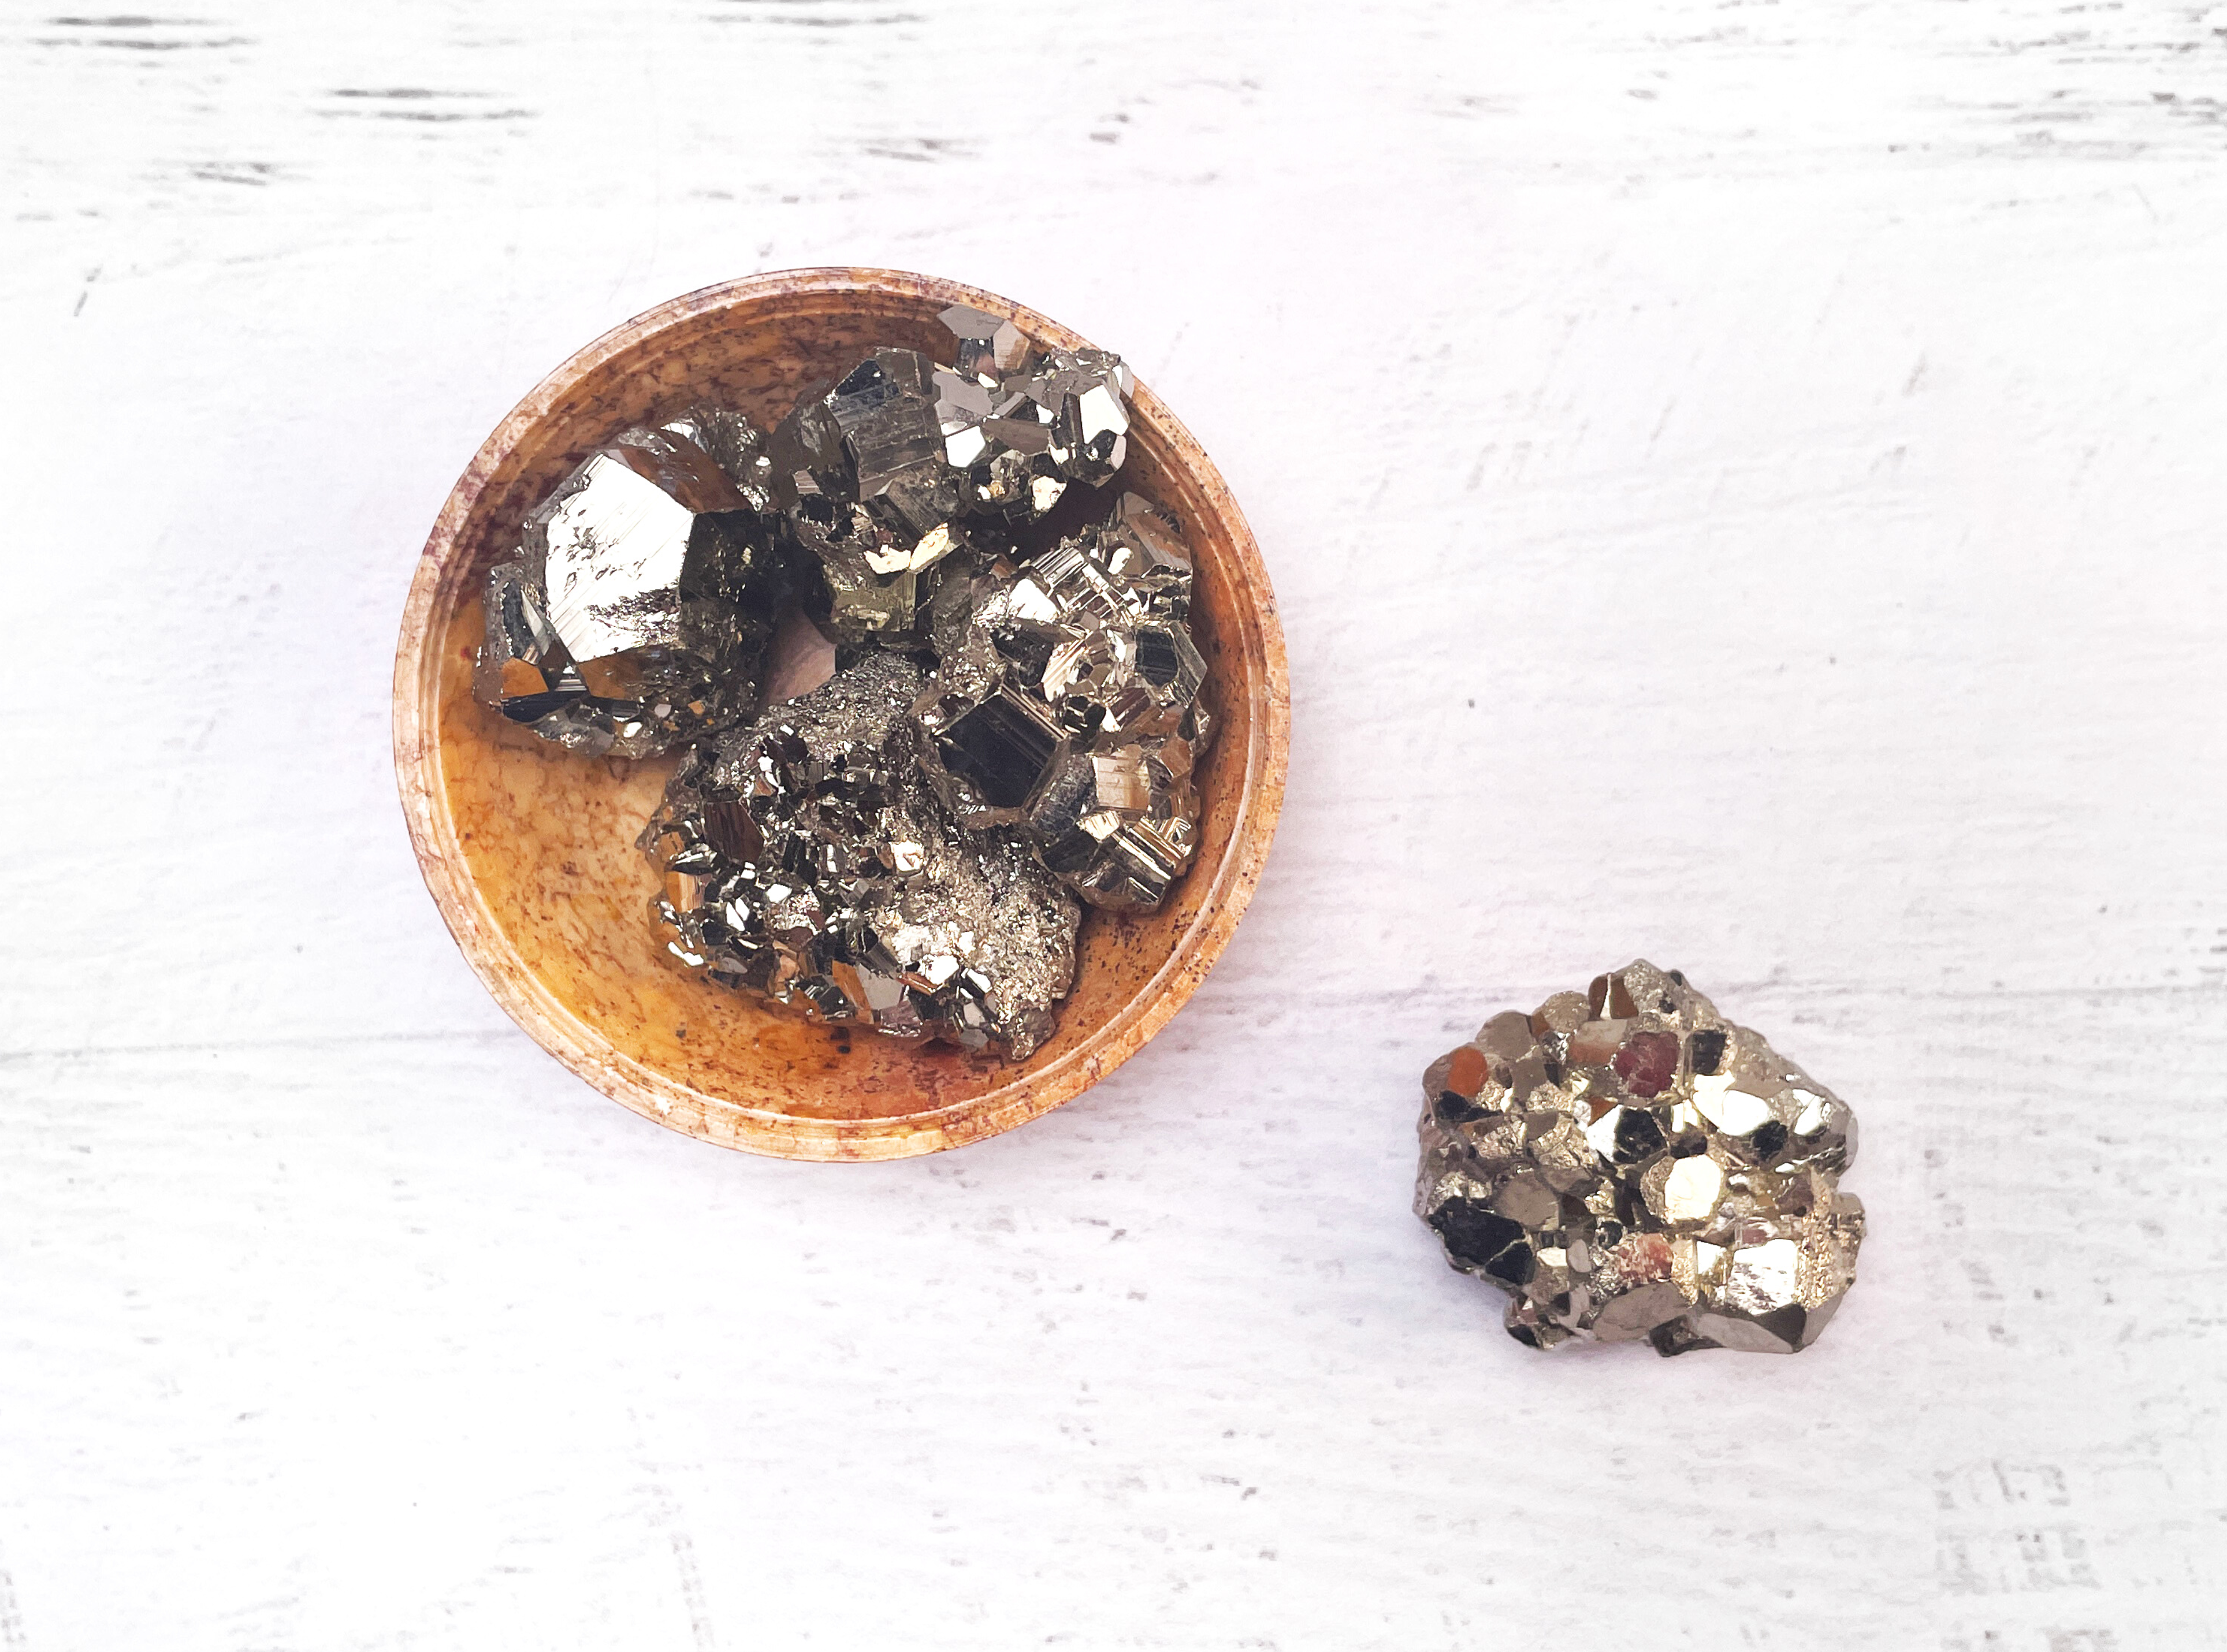 Buy Online Latest and Unique AAA Pyrite Crystal Clusters - Wealth, Luck, Abundance, "Fool's Gold" | Shop Best Spiritual Items - The Mystical Ritual